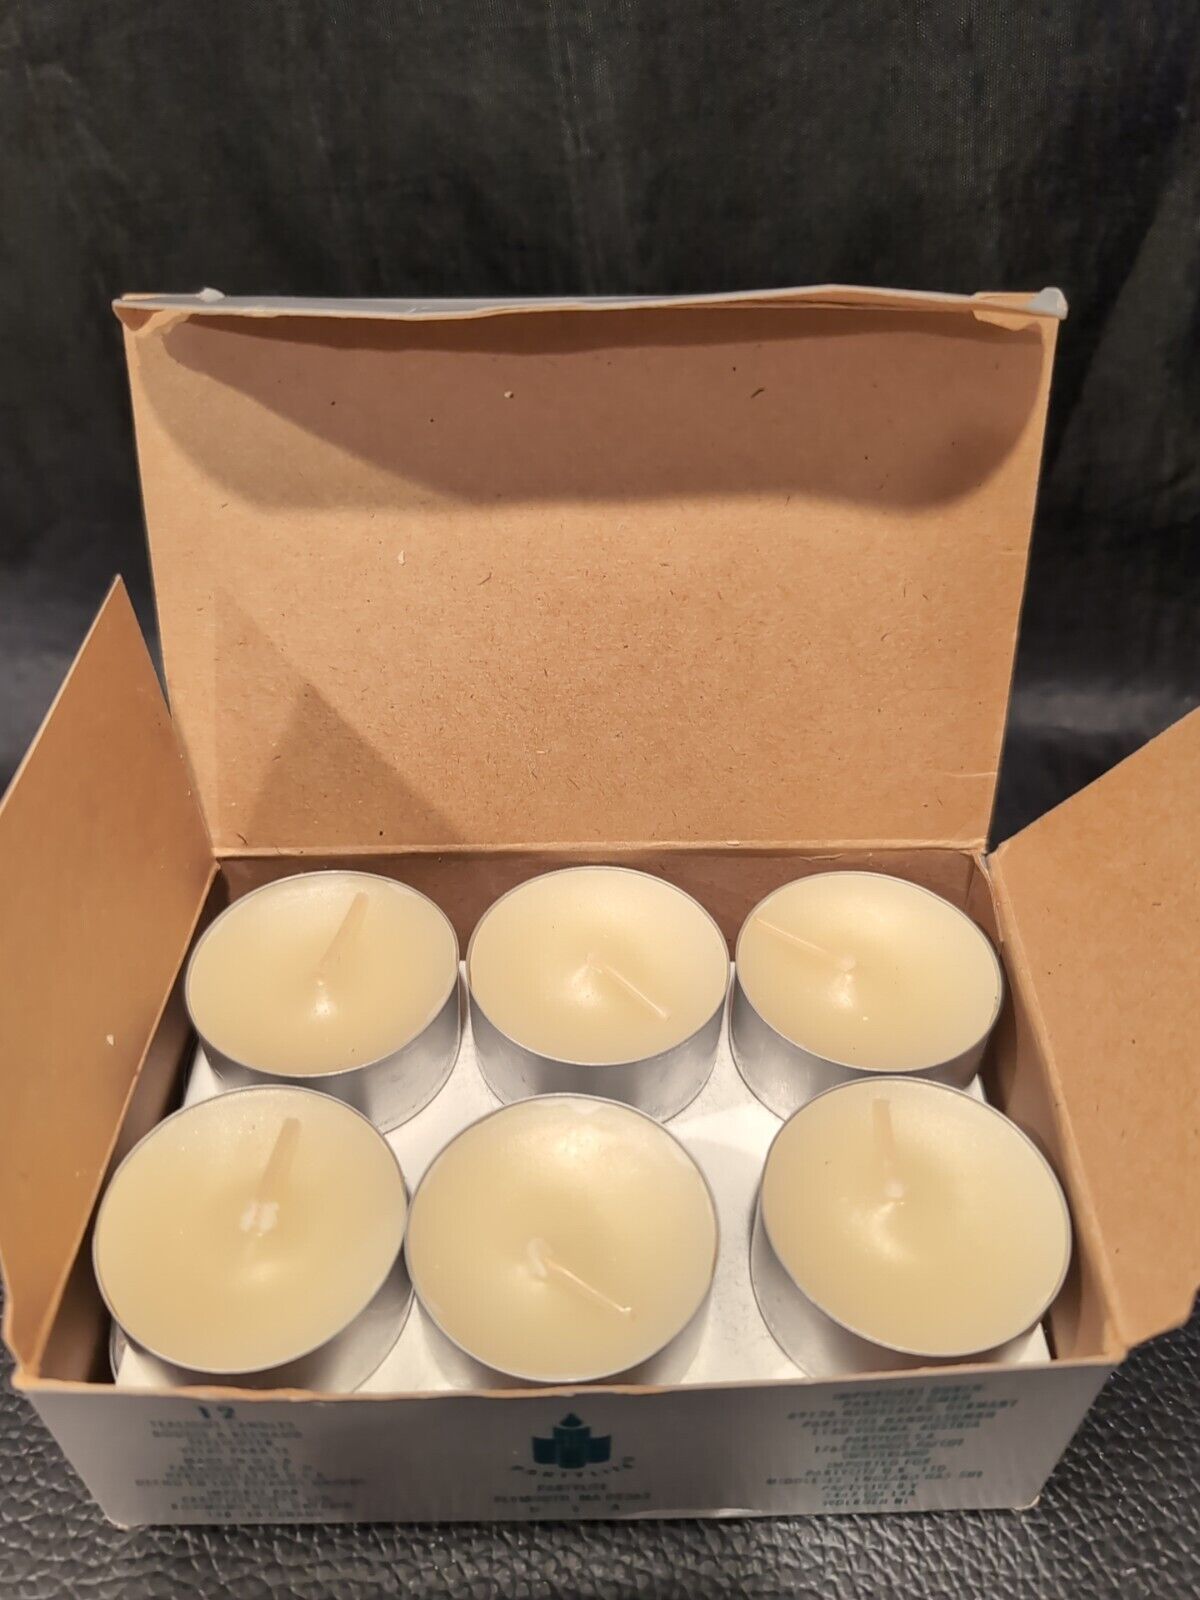 PartyLite Vanilla Tealights Box of 12 Candles V0211 NEW IN BOX 